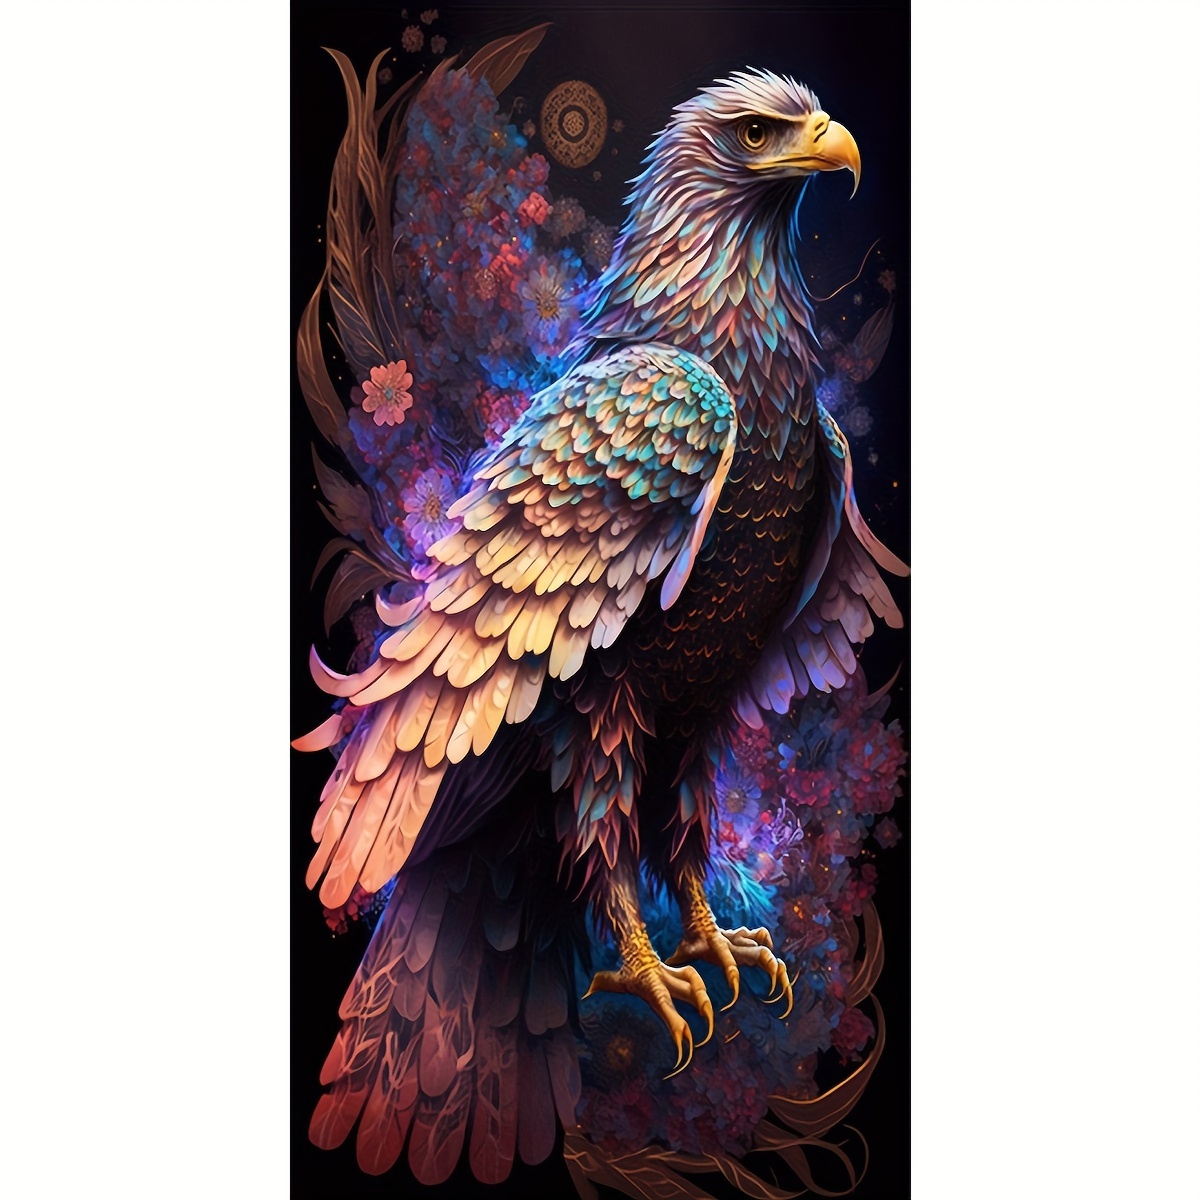 

1pc Large Size Eagle Pattern Diamond Art Painting Kit 5d Diamond Art Set Painting With Diamond Gems, Arts And Crafts For Home Wall Decor. No Frame (50x100cm/19.7x39.4inch)